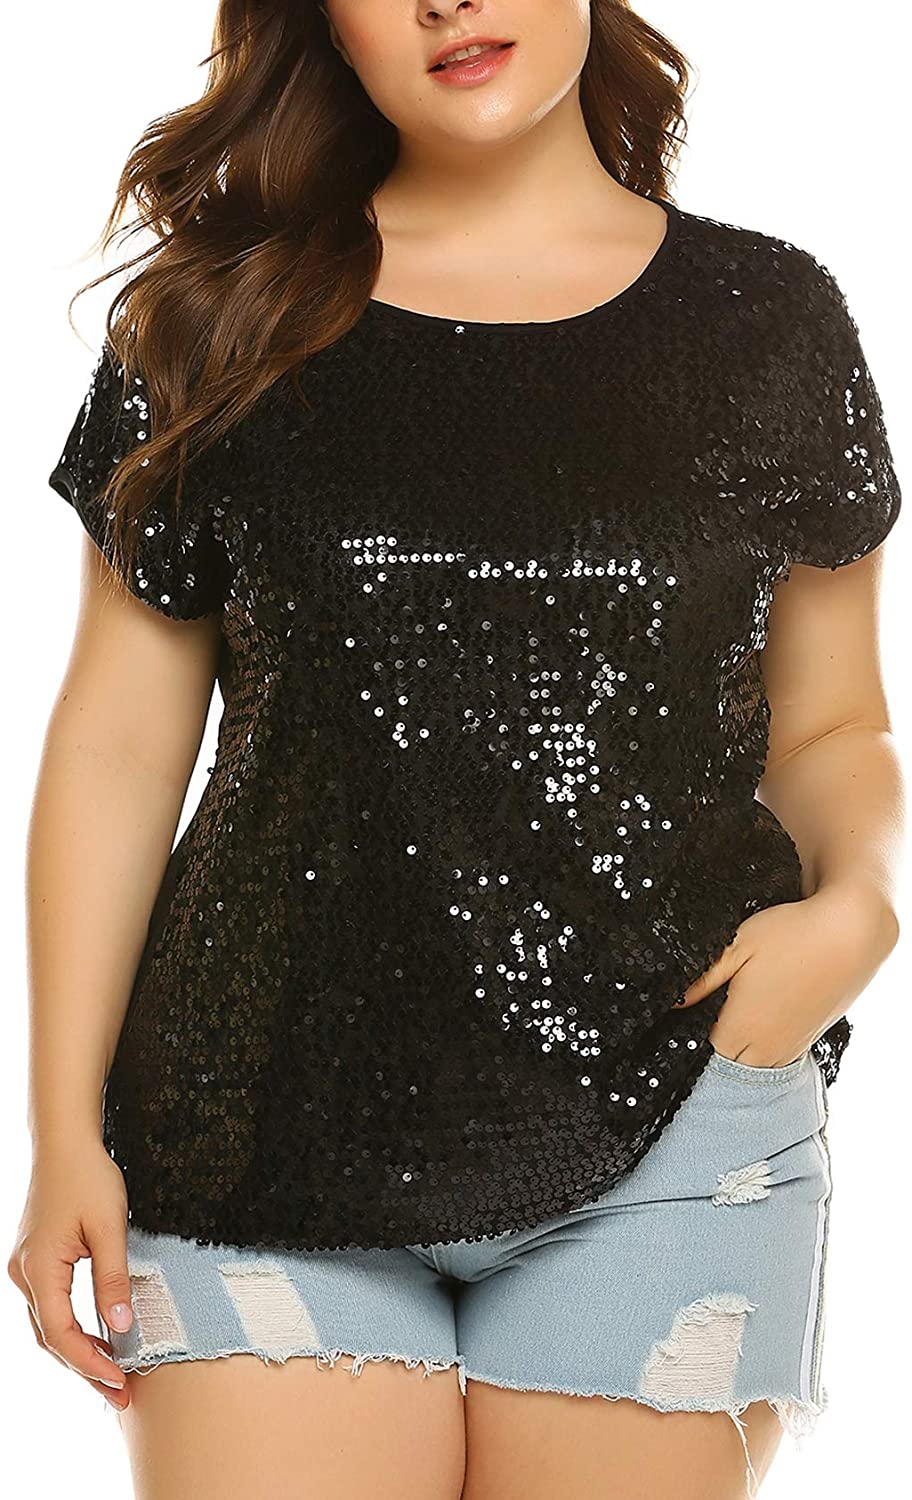 thumbnail 8 - IN&#039;VOLAND Women&#039;s Sequin Tops Plus Size Round Neck Sparkle Top Shimmer Glitter S